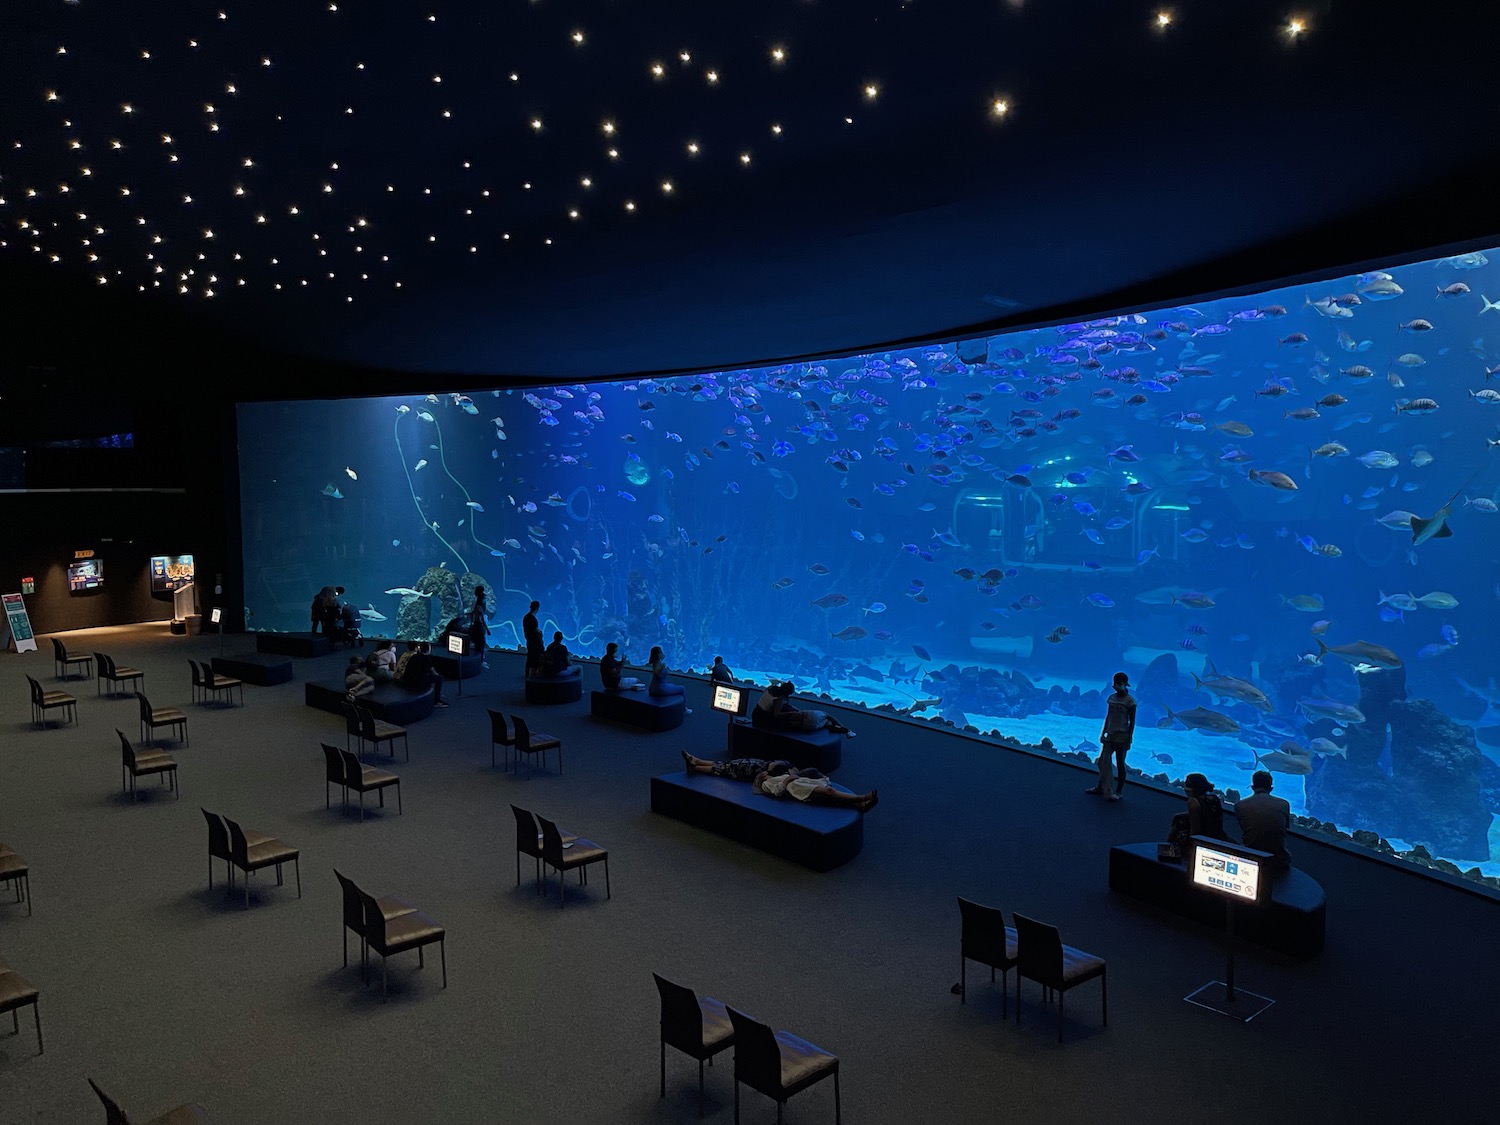 a large aquarium with fish and people